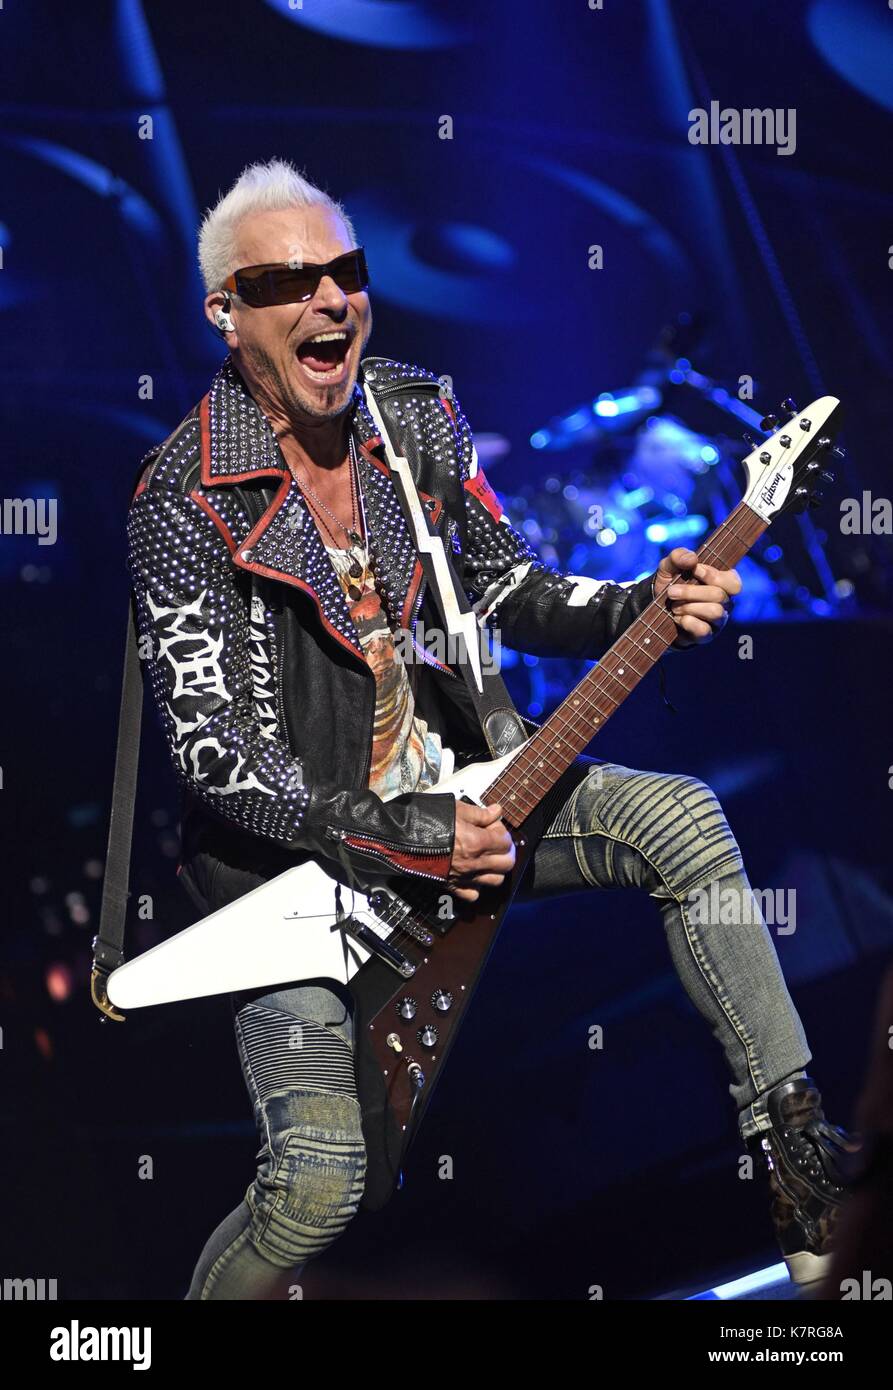 Rudolf schenker hi-res stock photography and images - Alamy